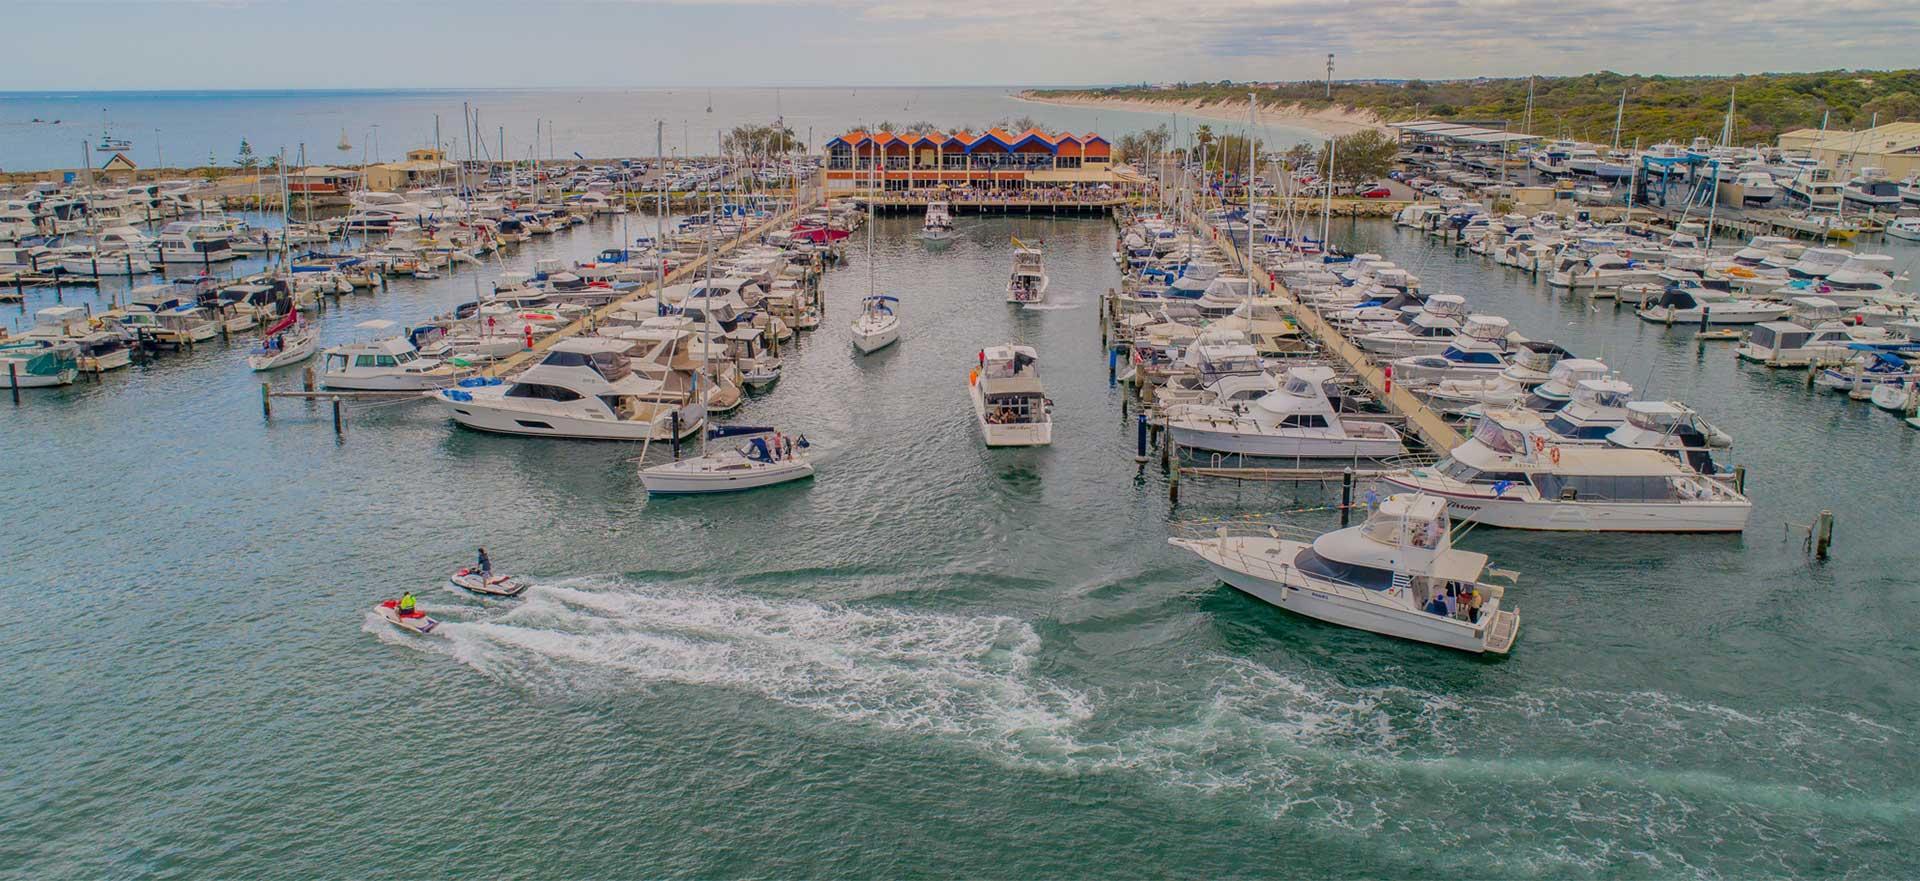 Better Sailing 1&2 for Teens Expression of Interest - Hillarys Yacht Club